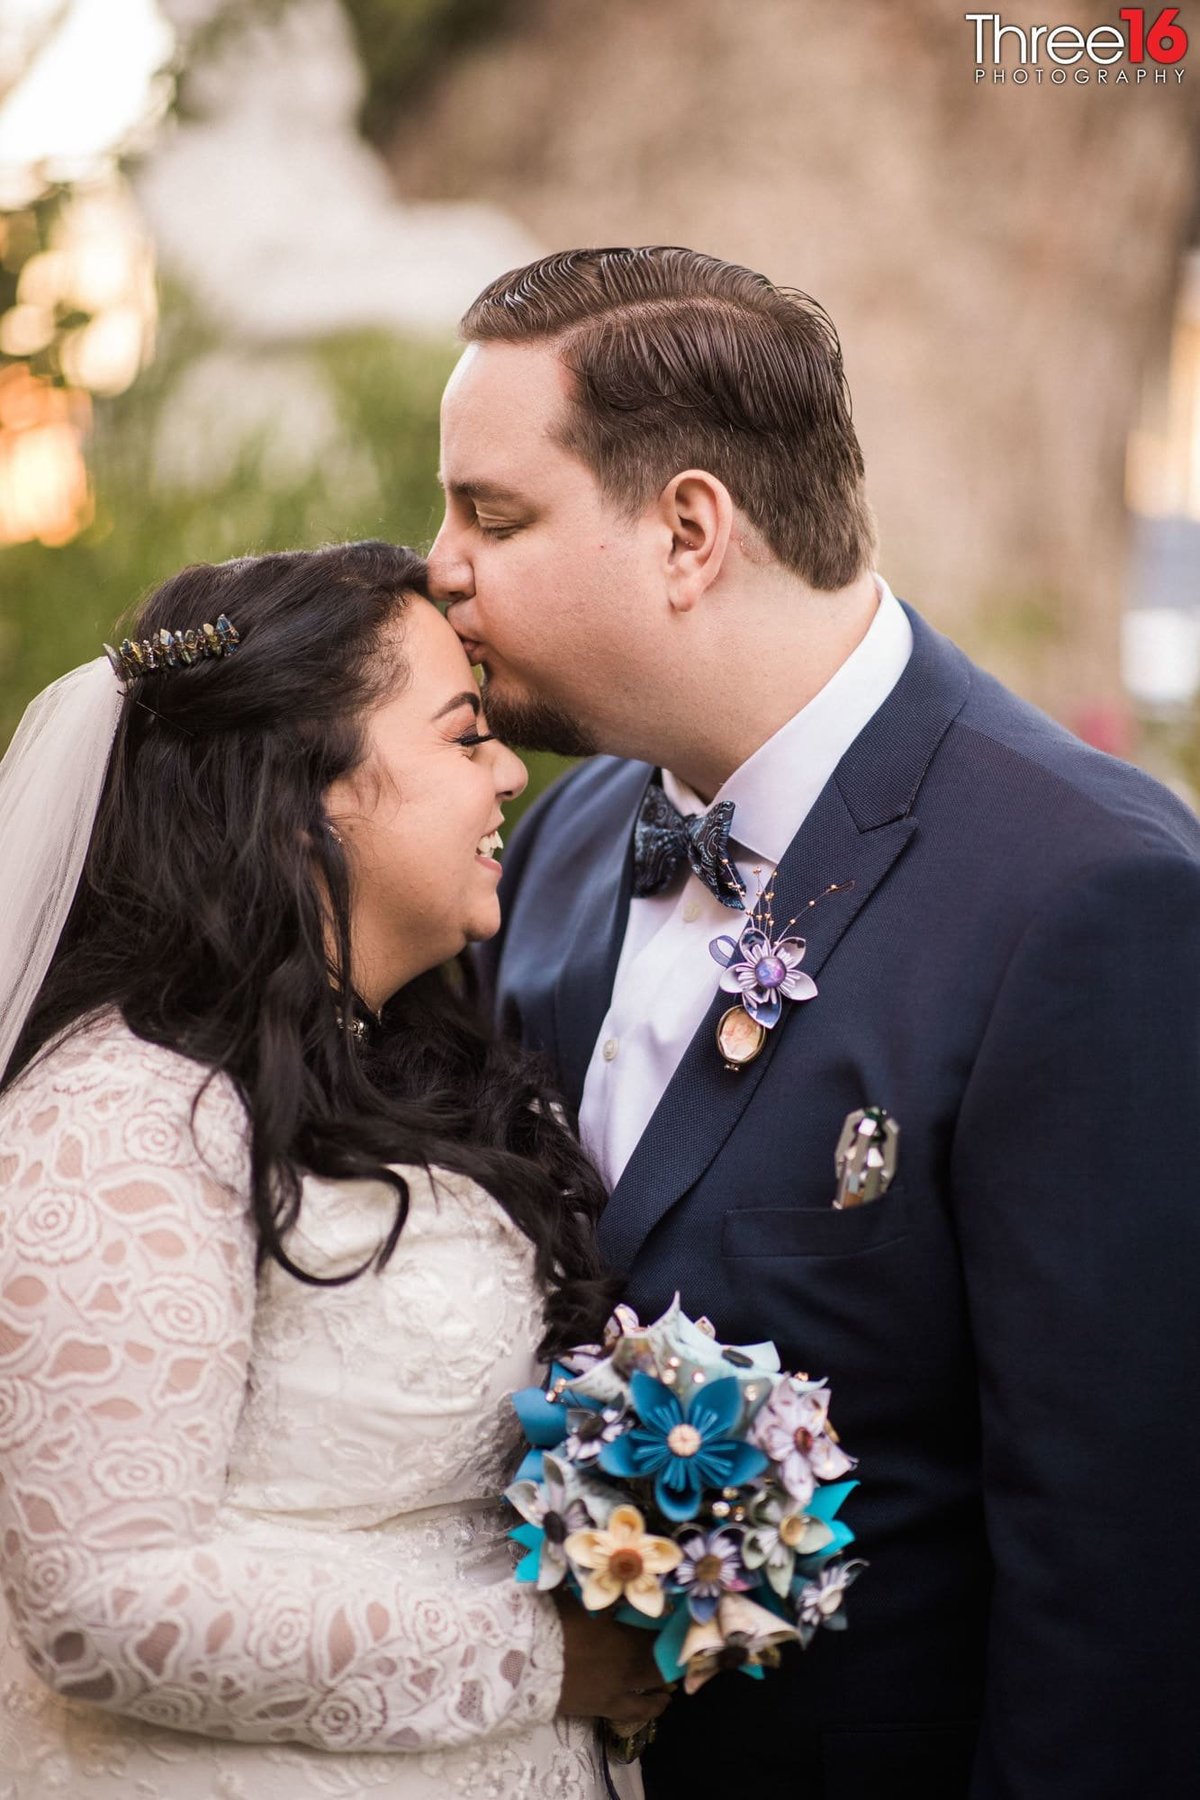 Sweet moment as Groom kisses his Bride's forehead